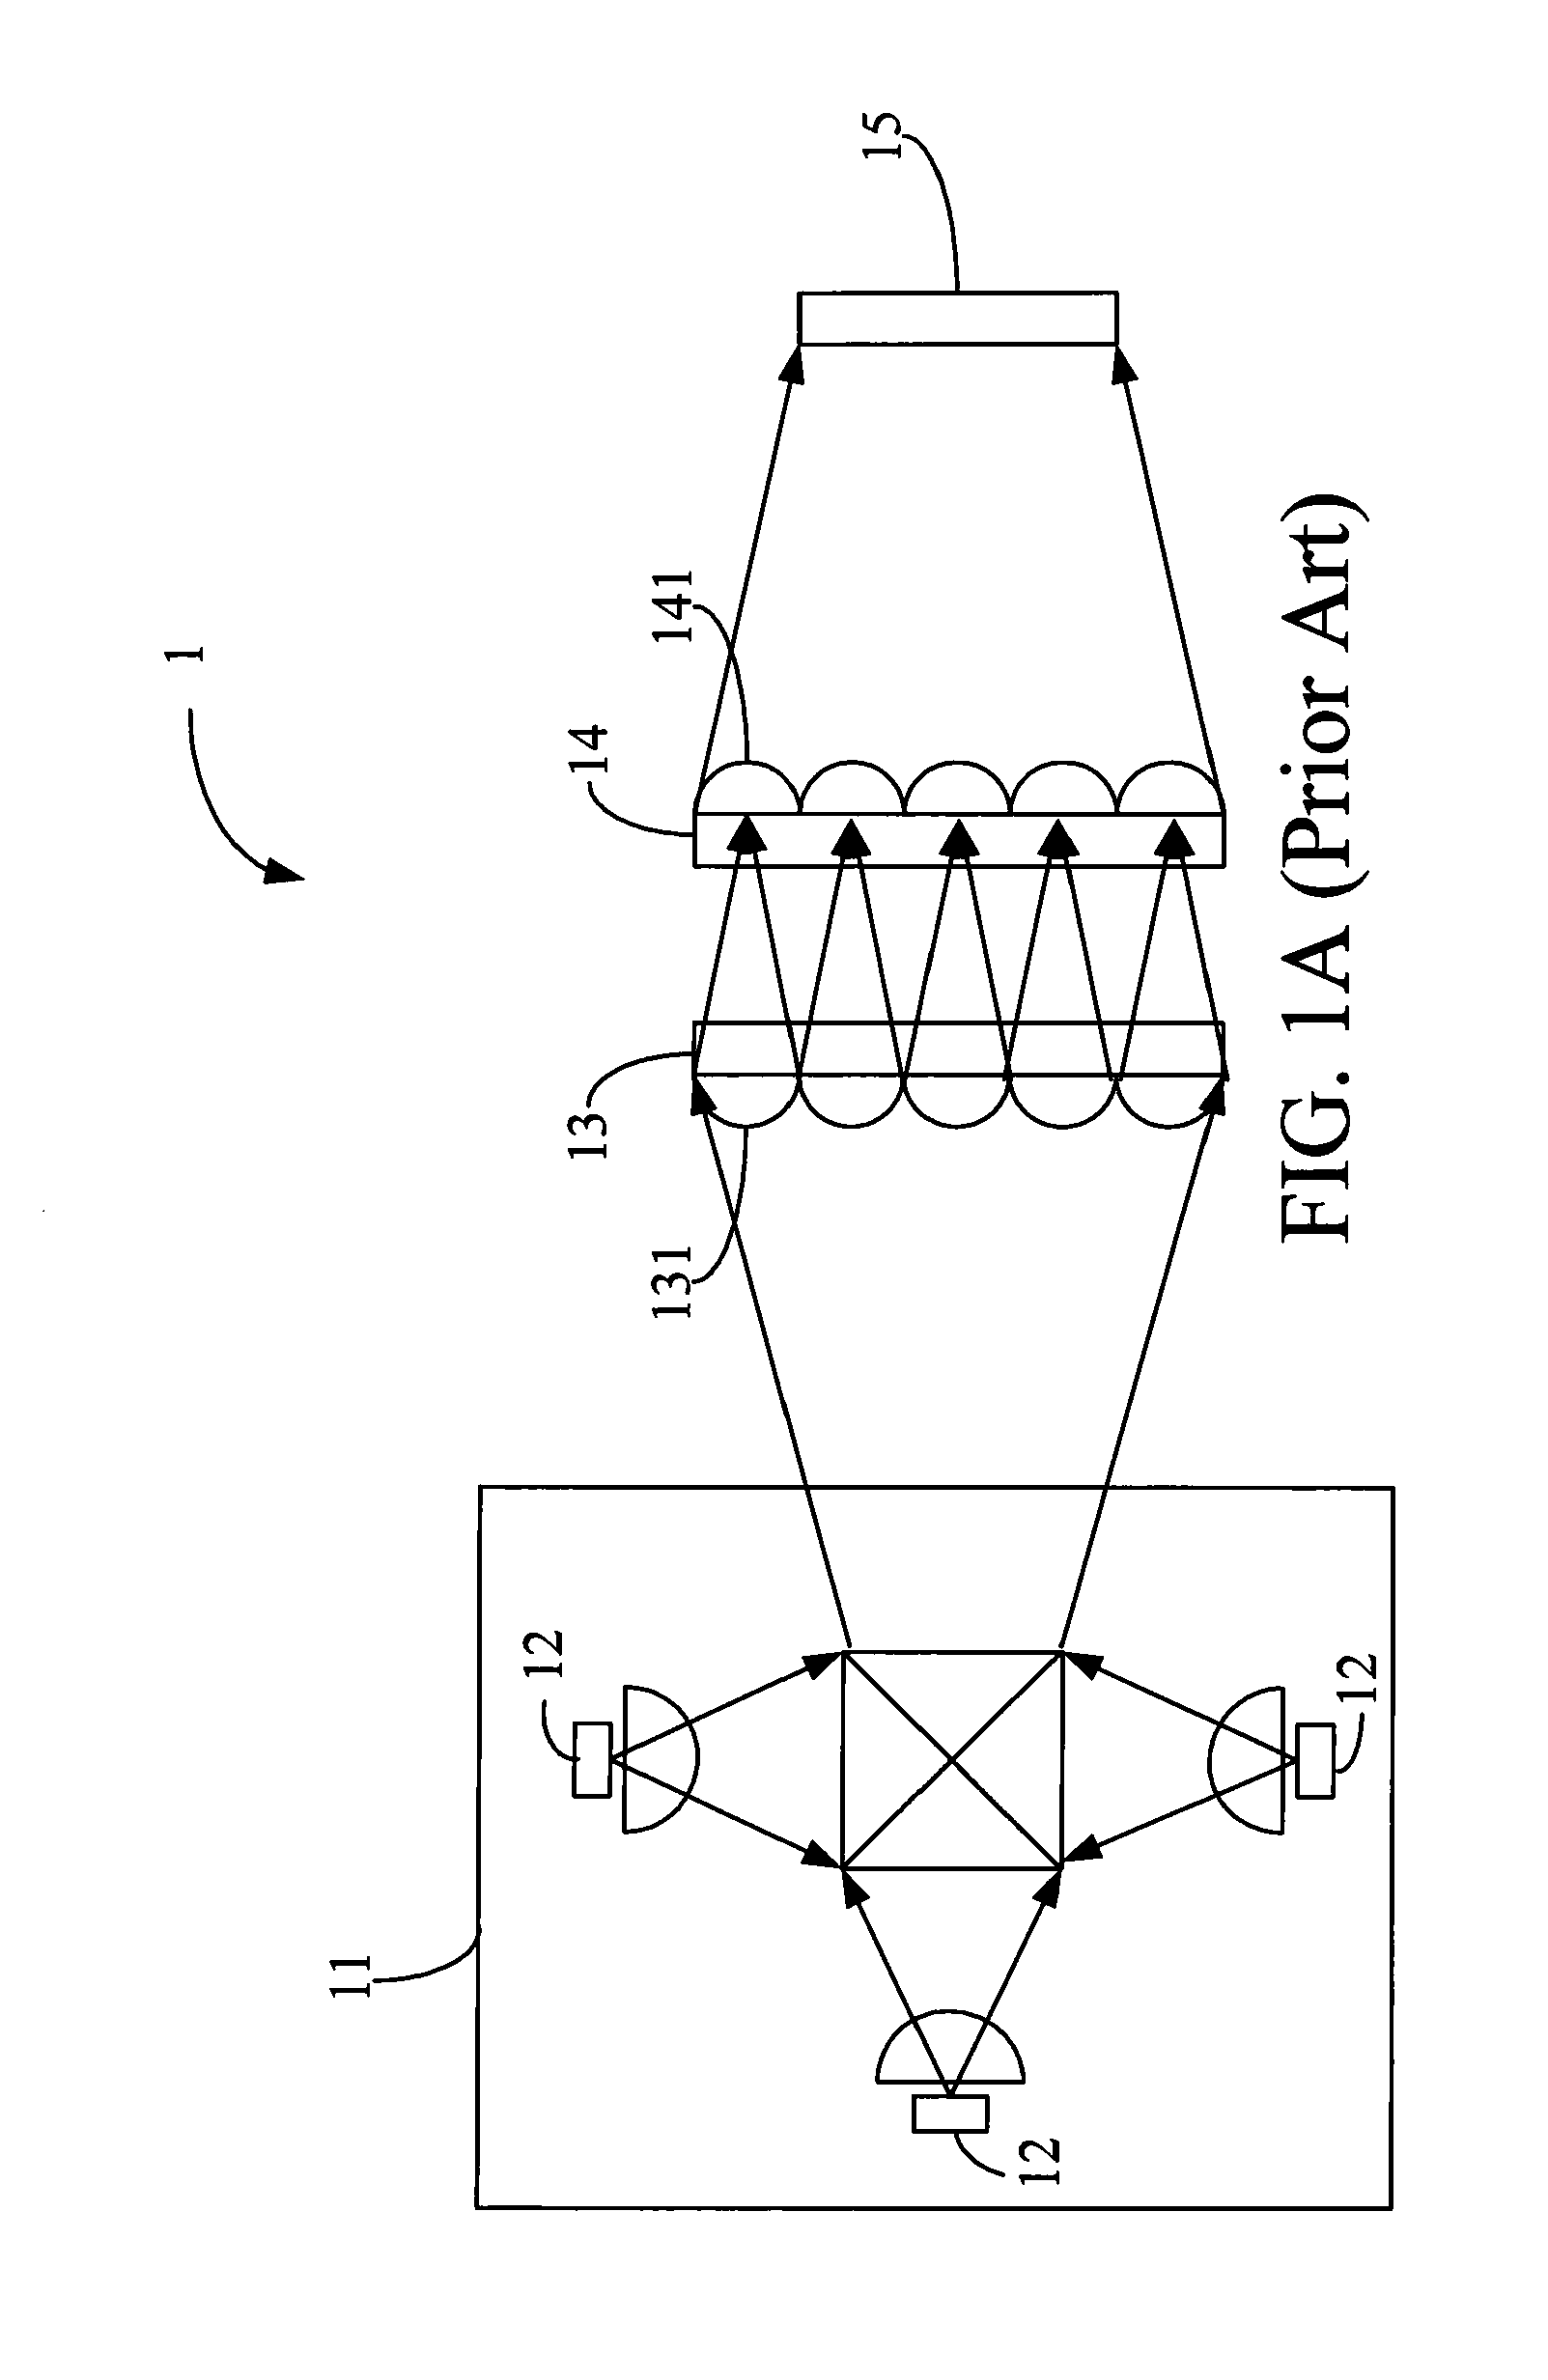 Lens array set and projection apparatus